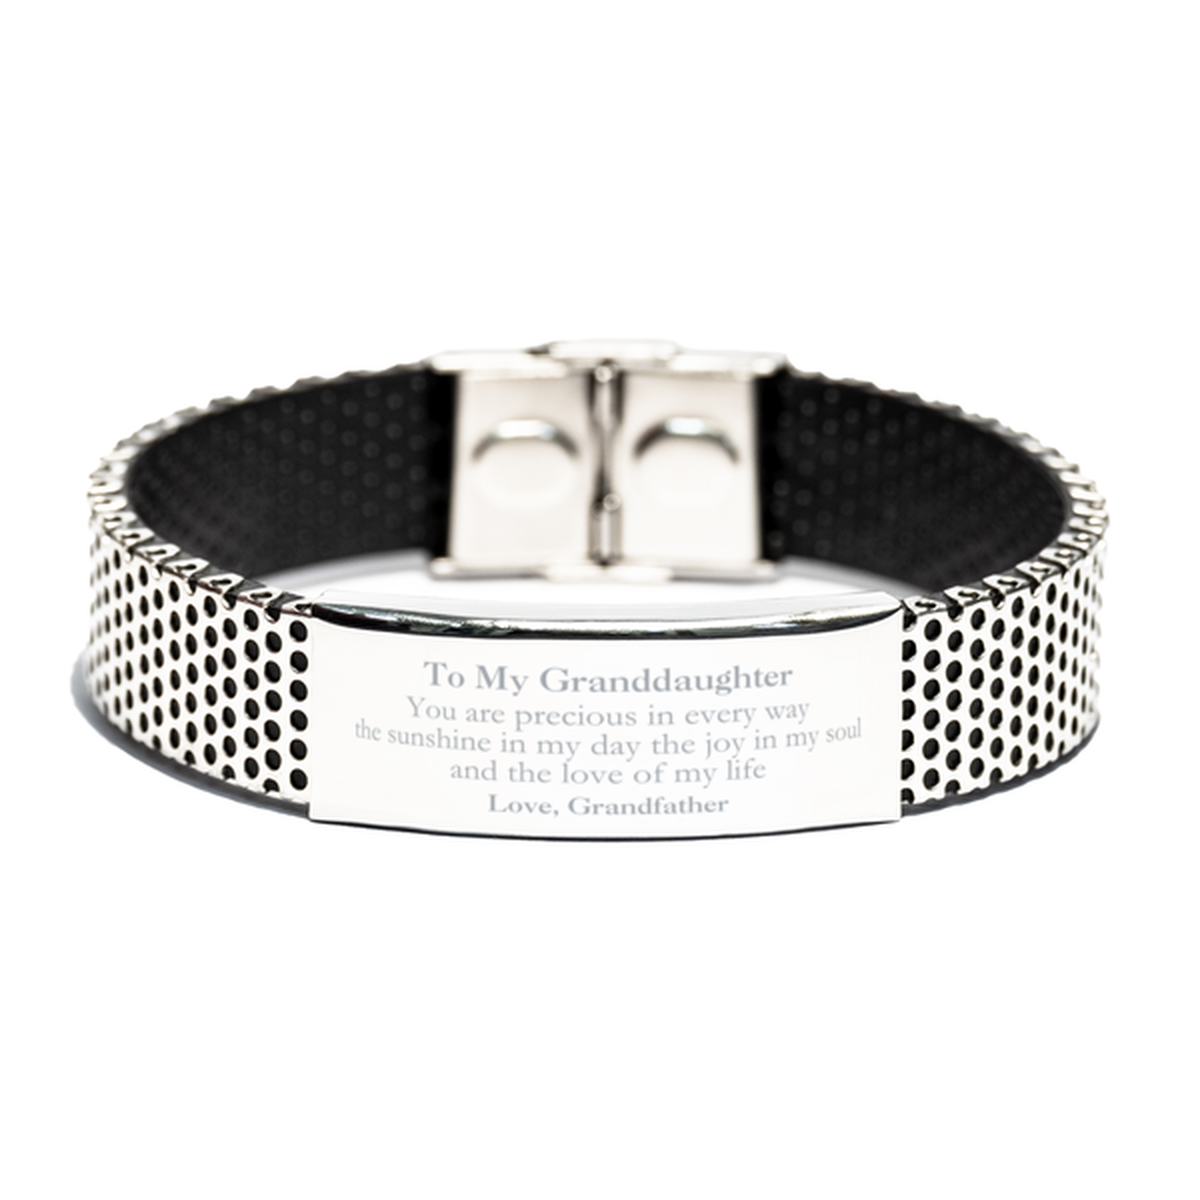 Graduation Gifts for Granddaughter Stainless Steel Bracelet Present from Grandfather, Christmas Granddaughter Birthday Gifts Granddaughter You are precious in every way the sunshine in my day. Love, Grandfather